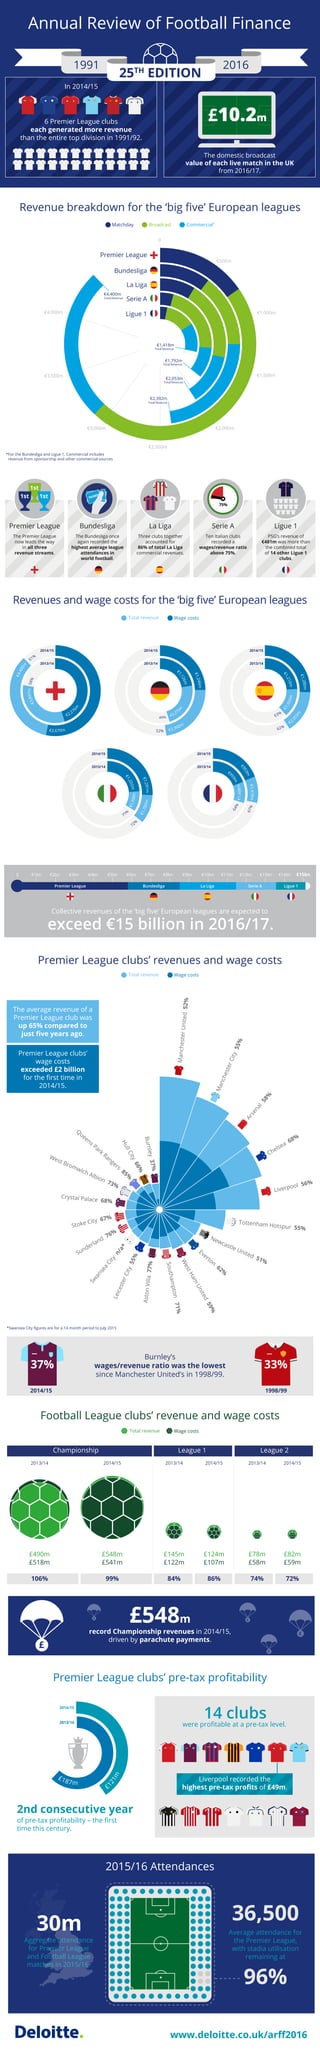 Deloitte UK Annual Review of Football Finance infographic